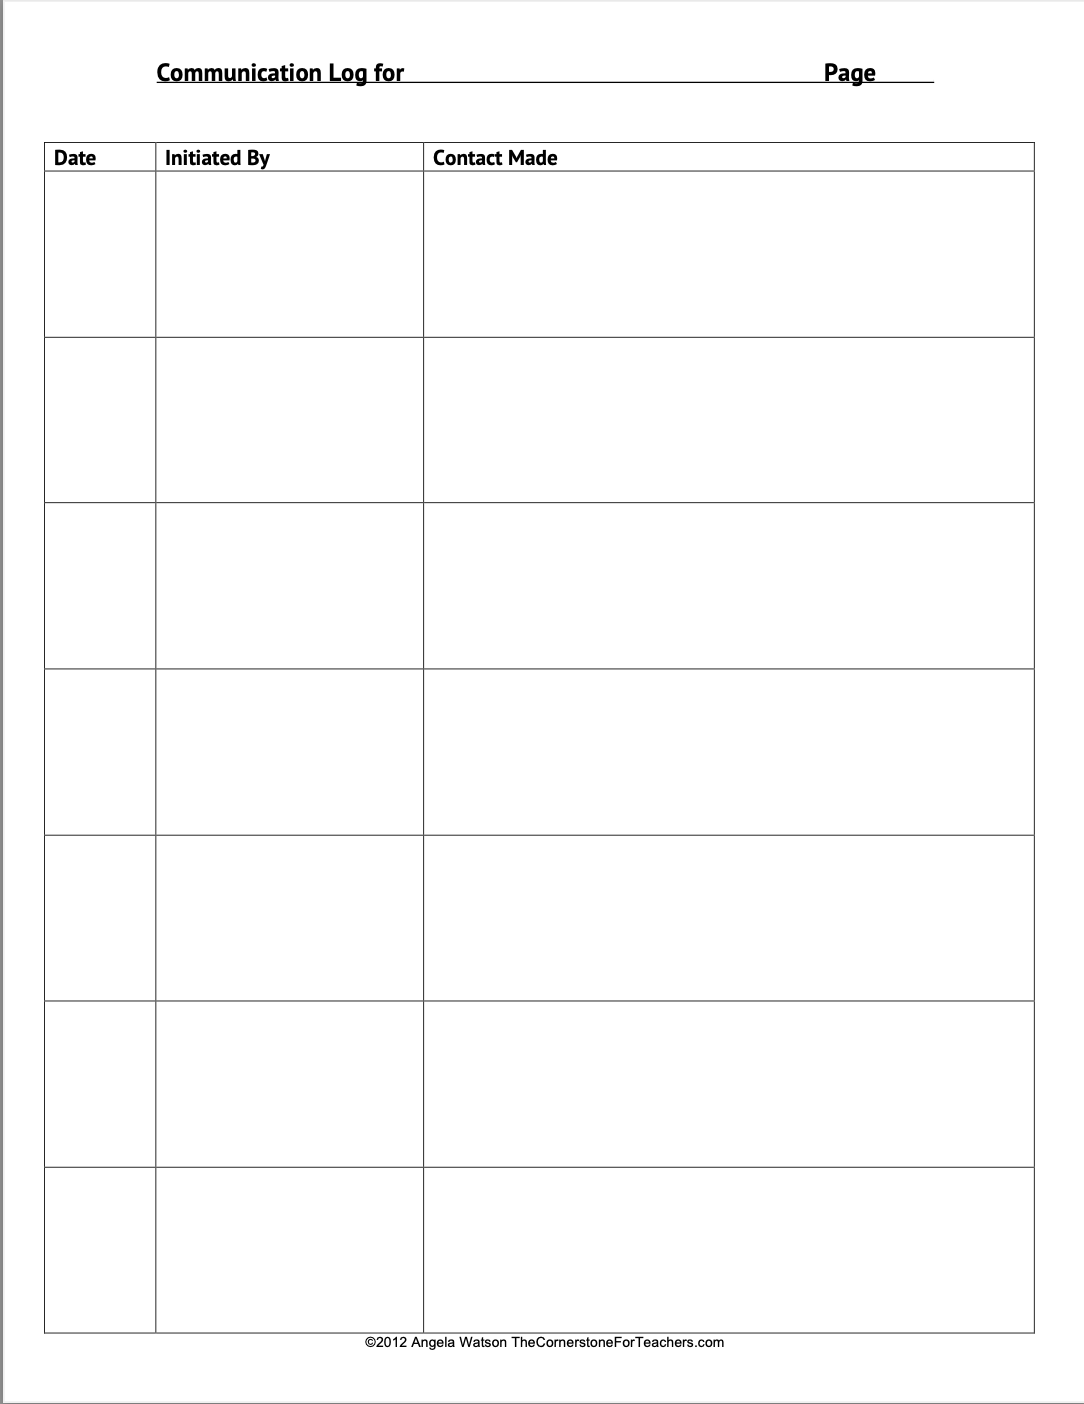 FREE Parent-Teacher Communication Log: Forms for Documenting Phone Calls